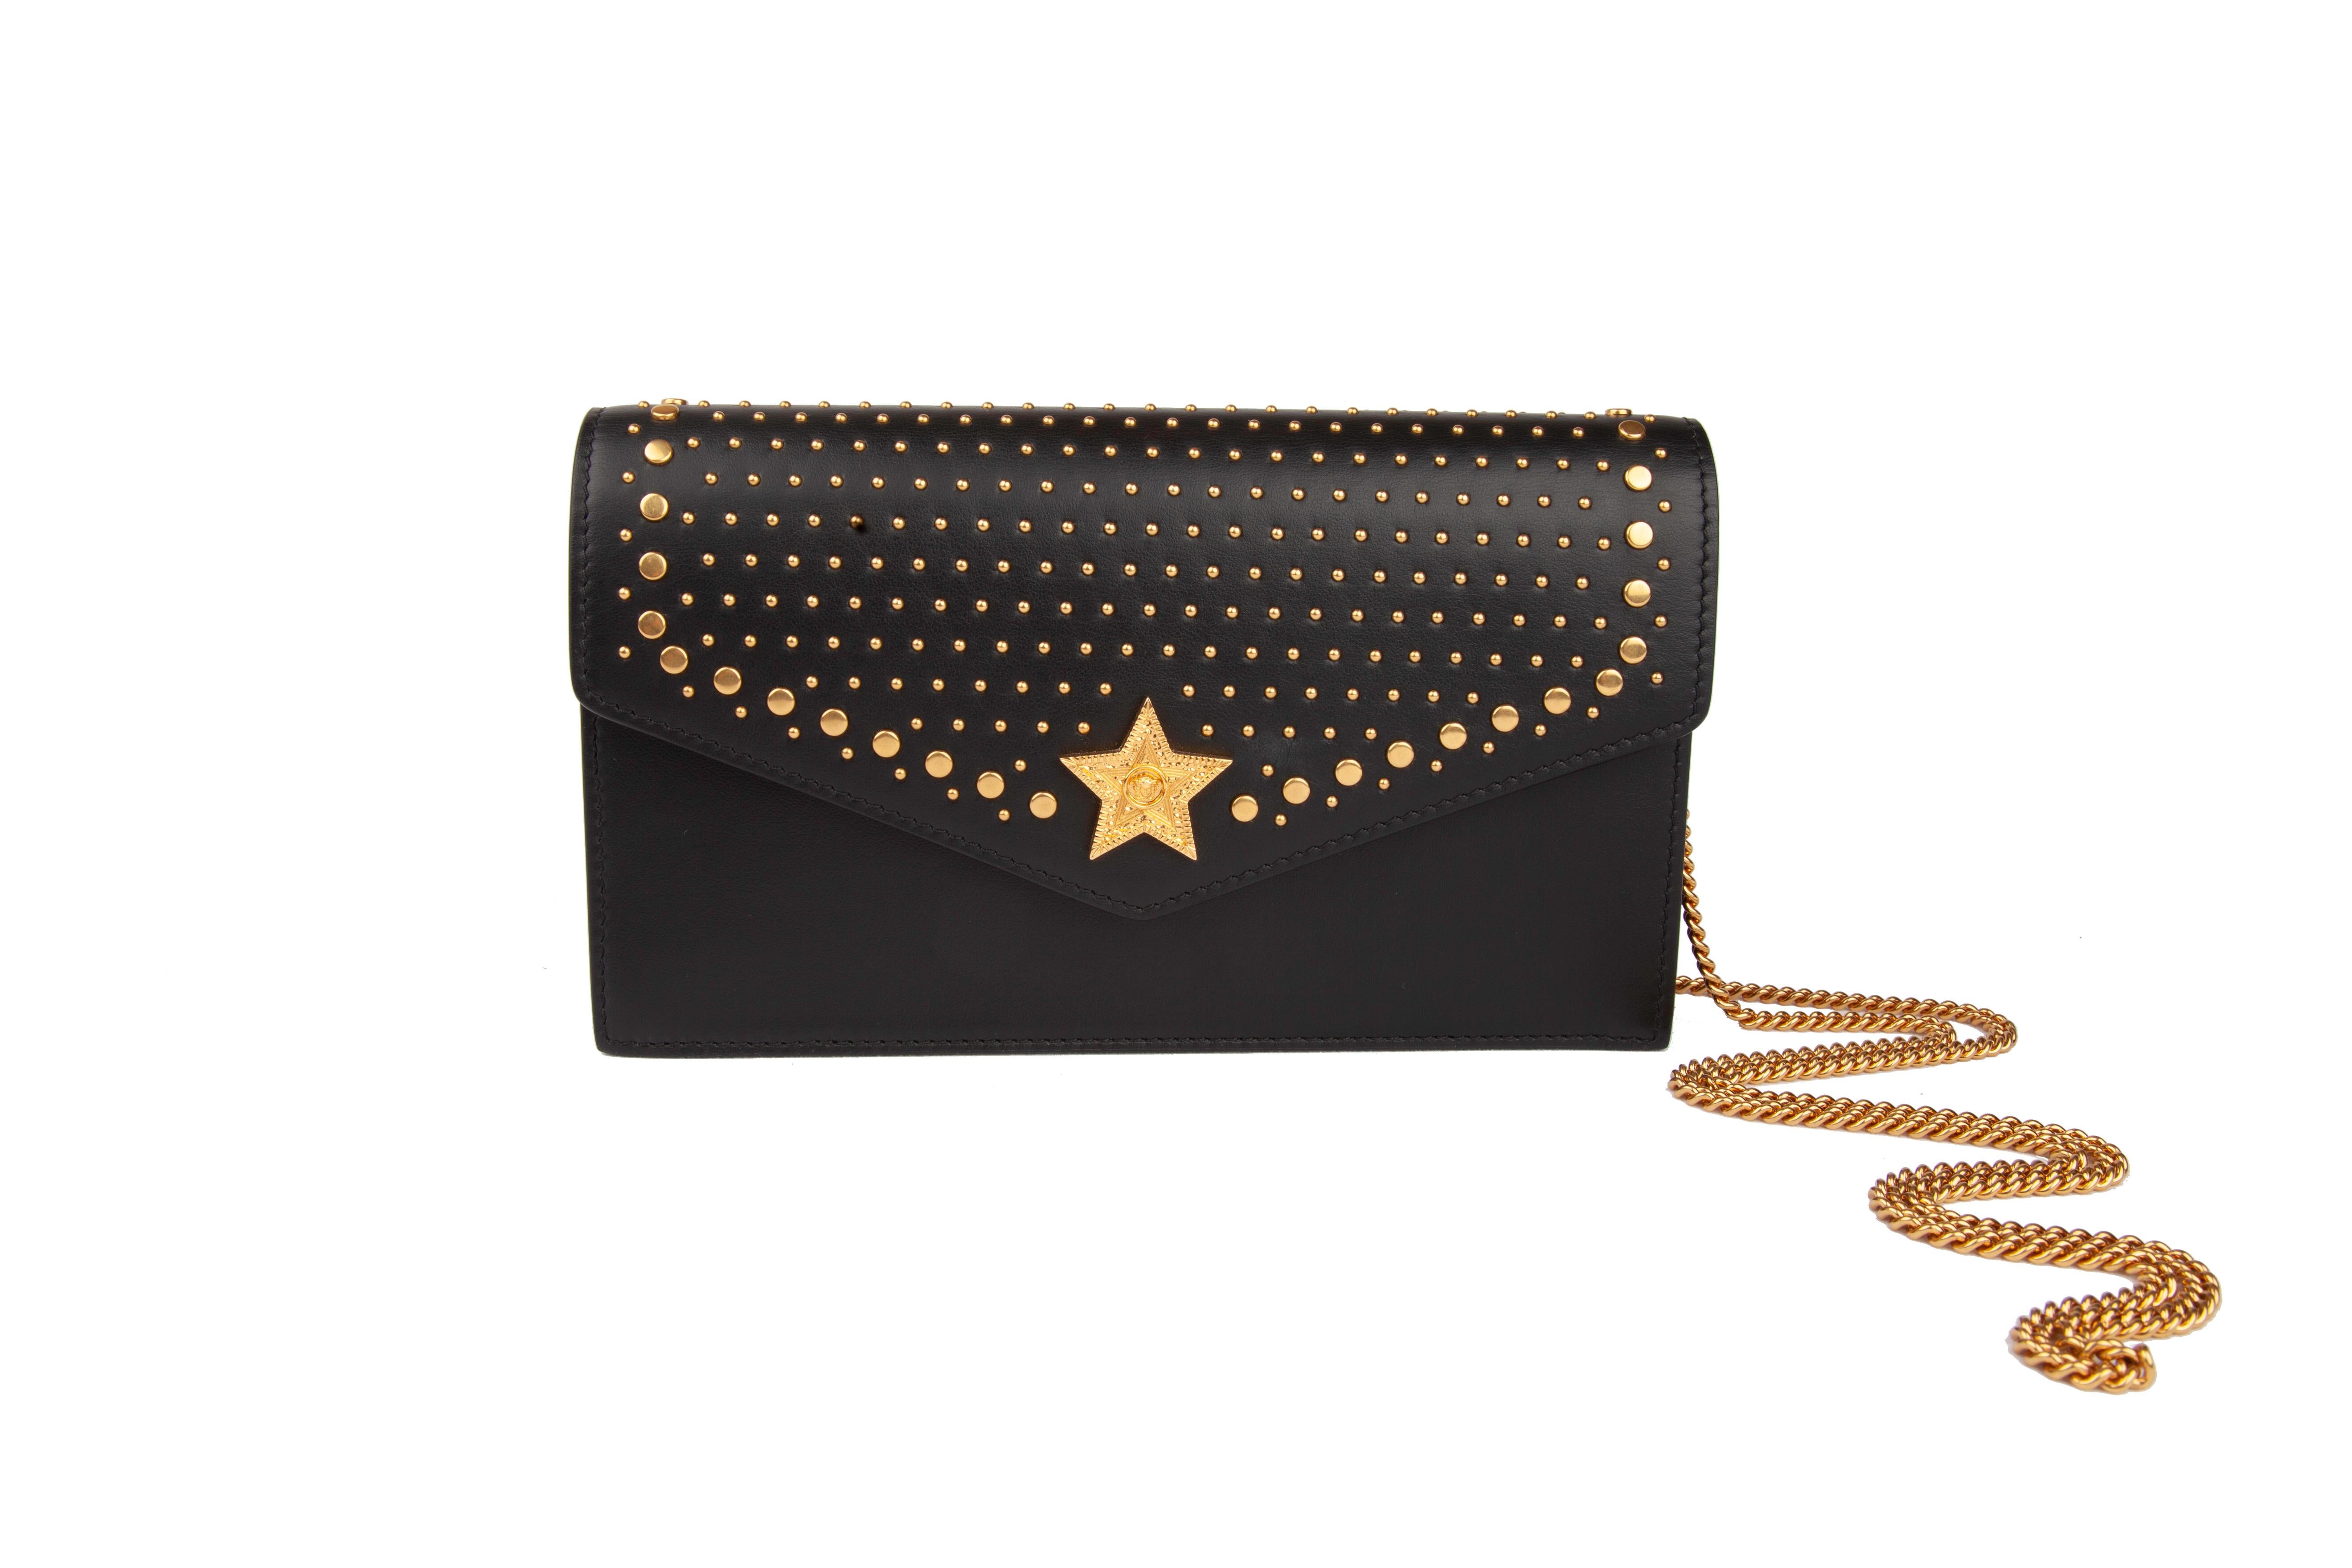 Versace Western Studded Black Leather Clutch Evening Bag with Gold Tone Chain 2